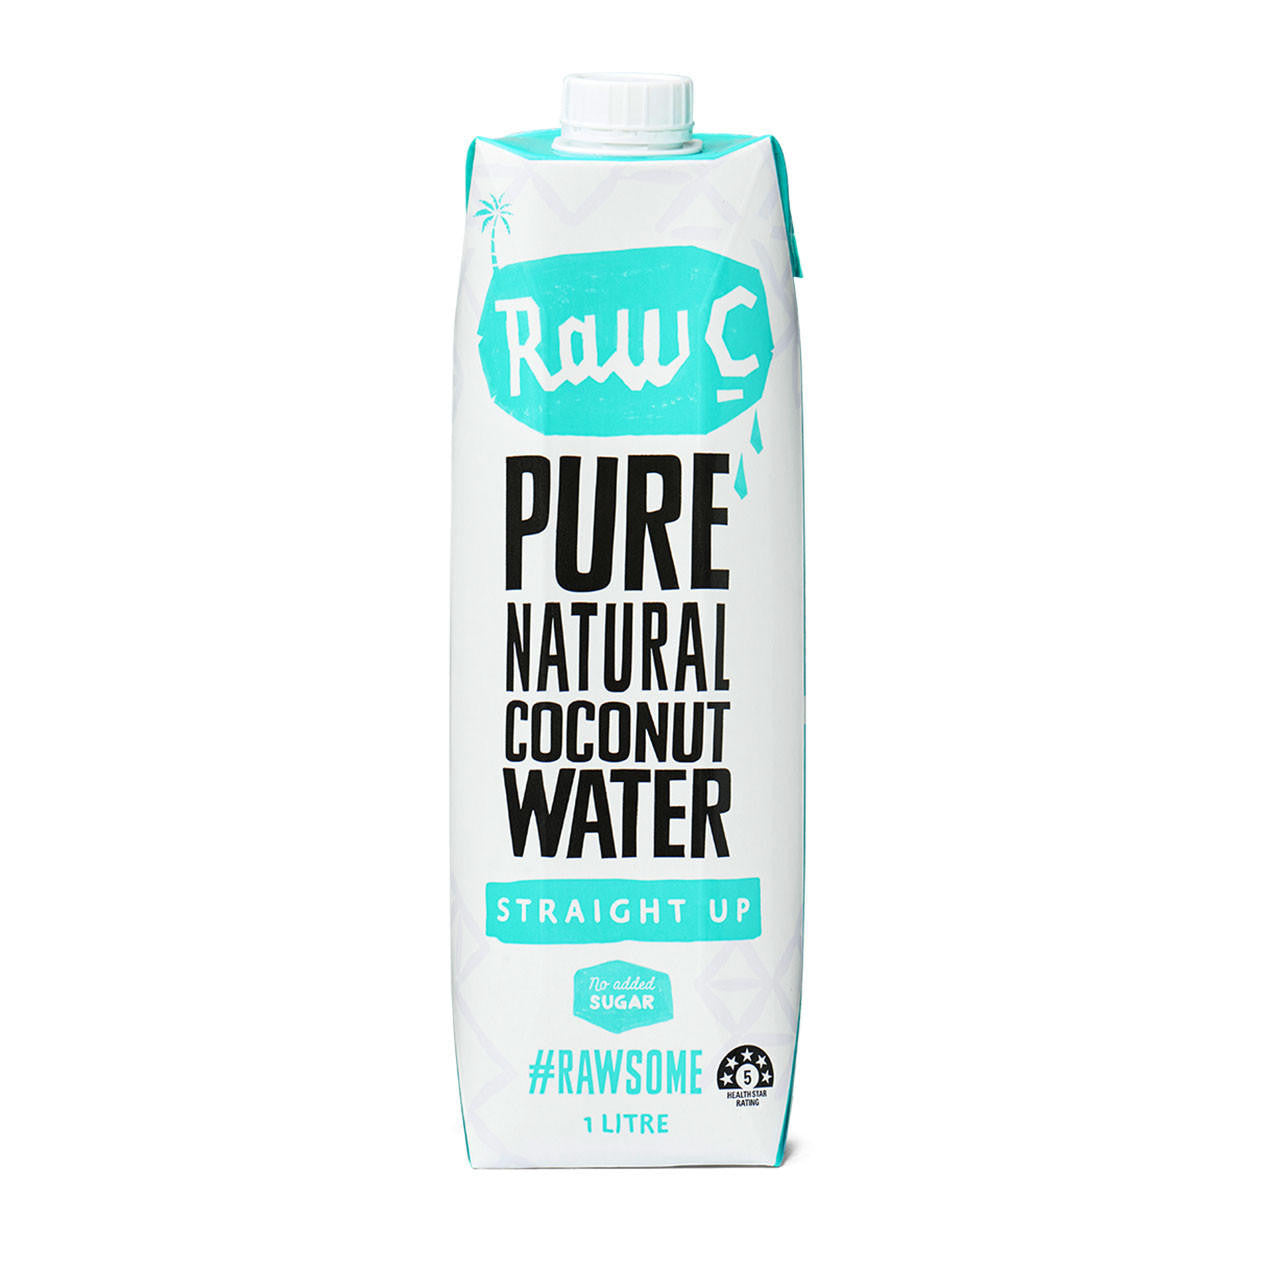 raw-c-pure-natural-coconut-water